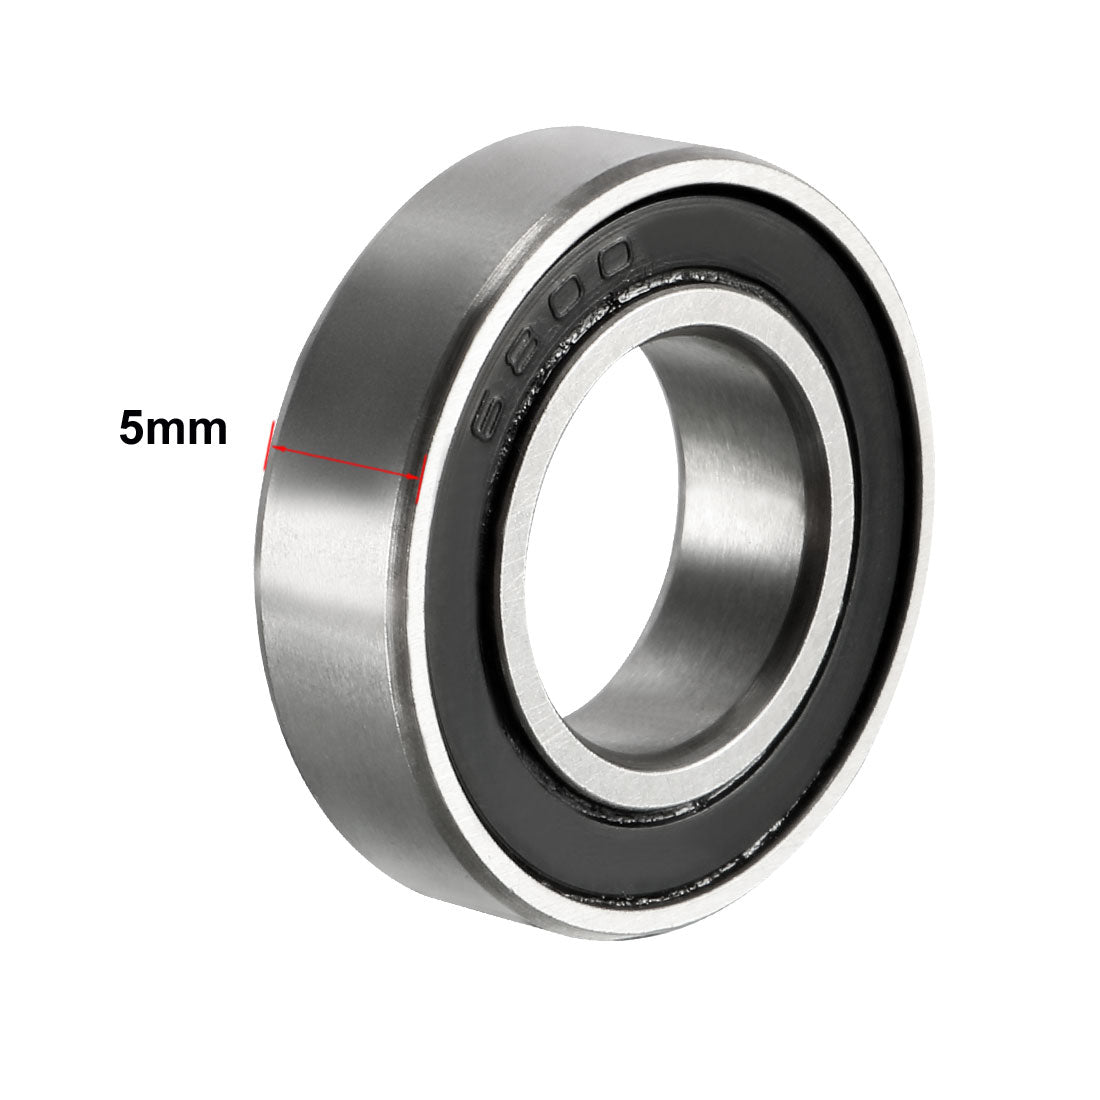 uxcell Uxcell Deep Groove Ball Bearings Metric Double Sealed Carbon Steel